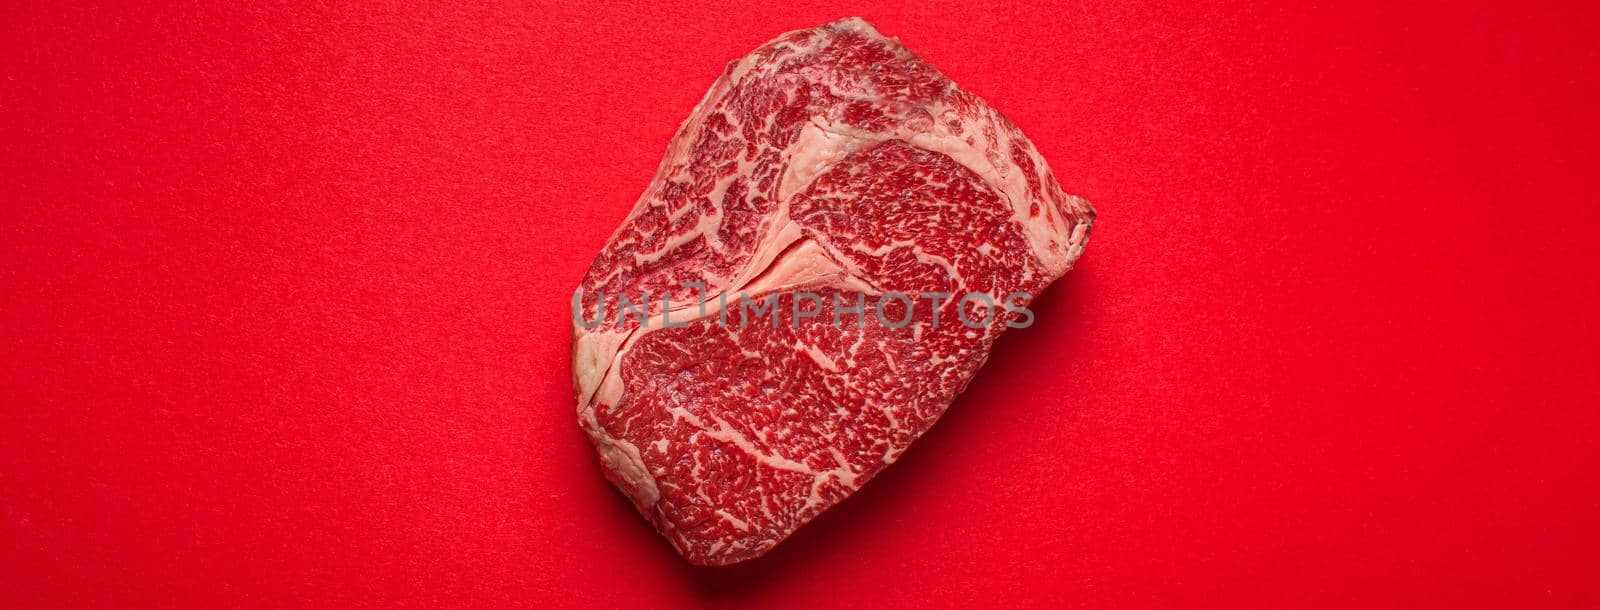 Raw fresh uncooked meat beef prime cut steak Ribeye on clean red background from above, beefsteak concept banner minimalism